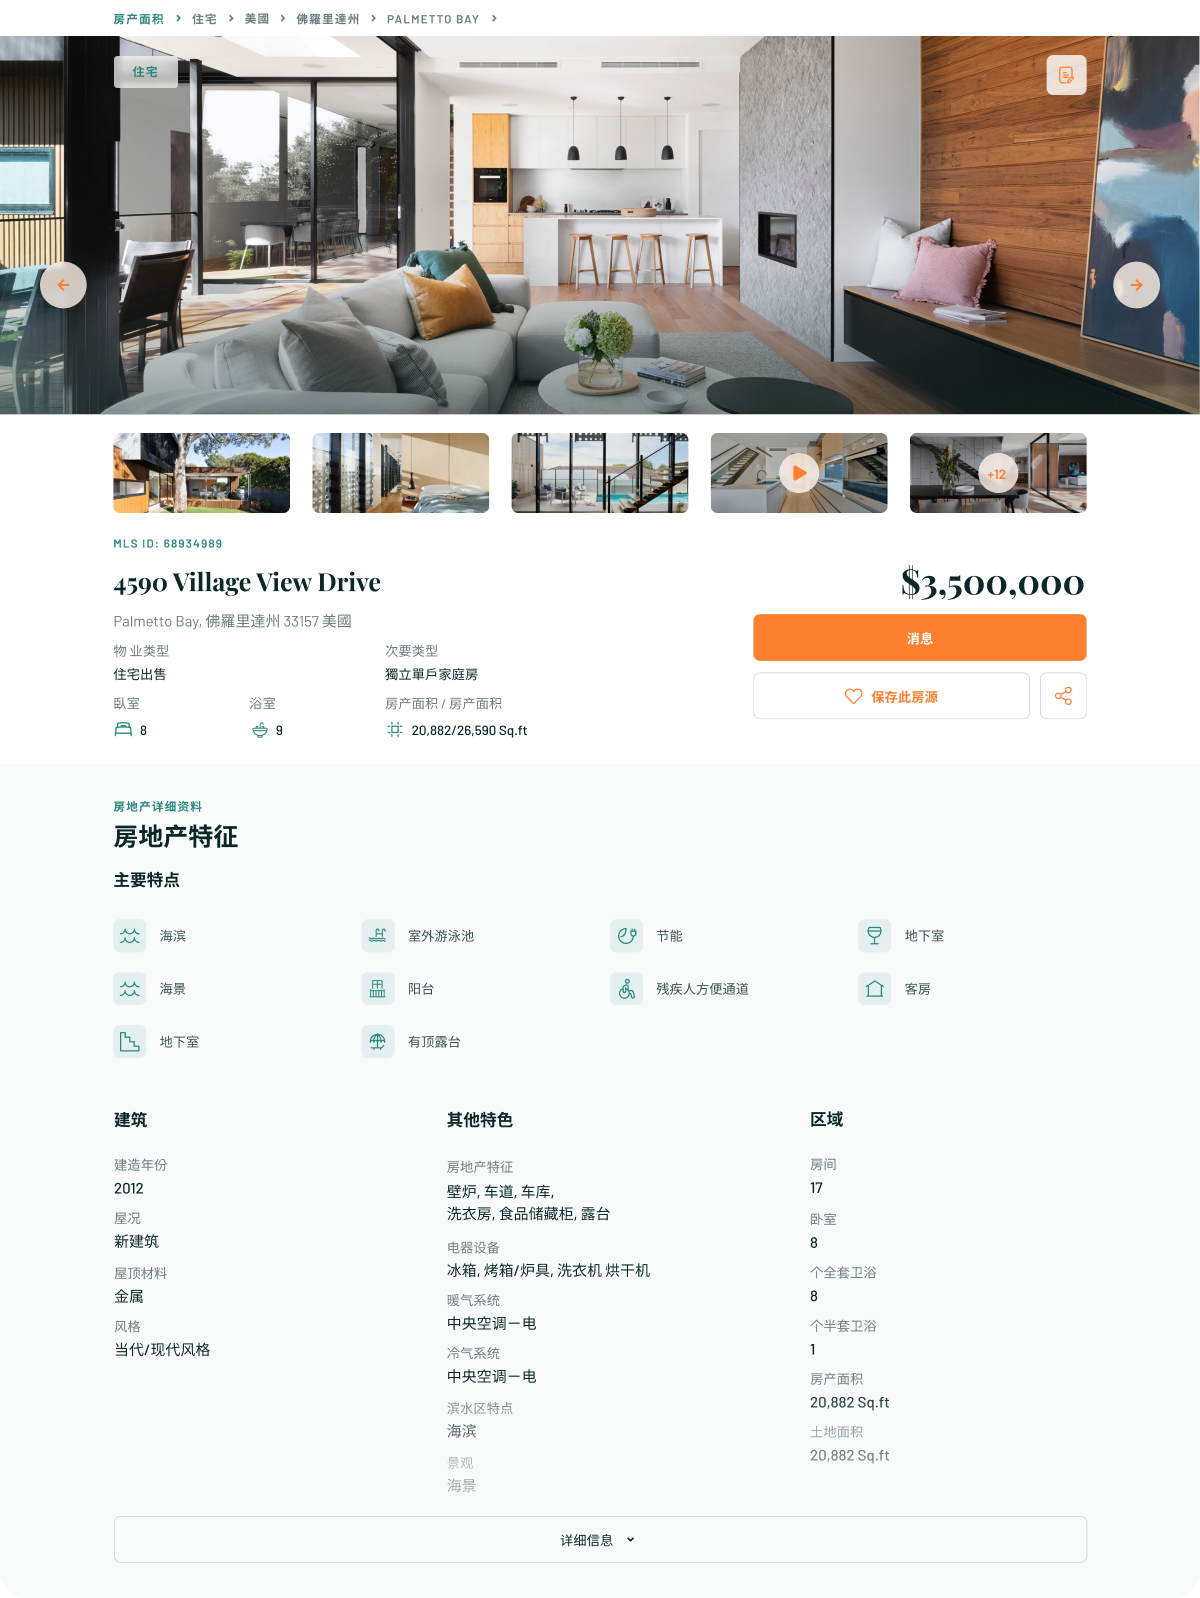 Listing page in Chinese